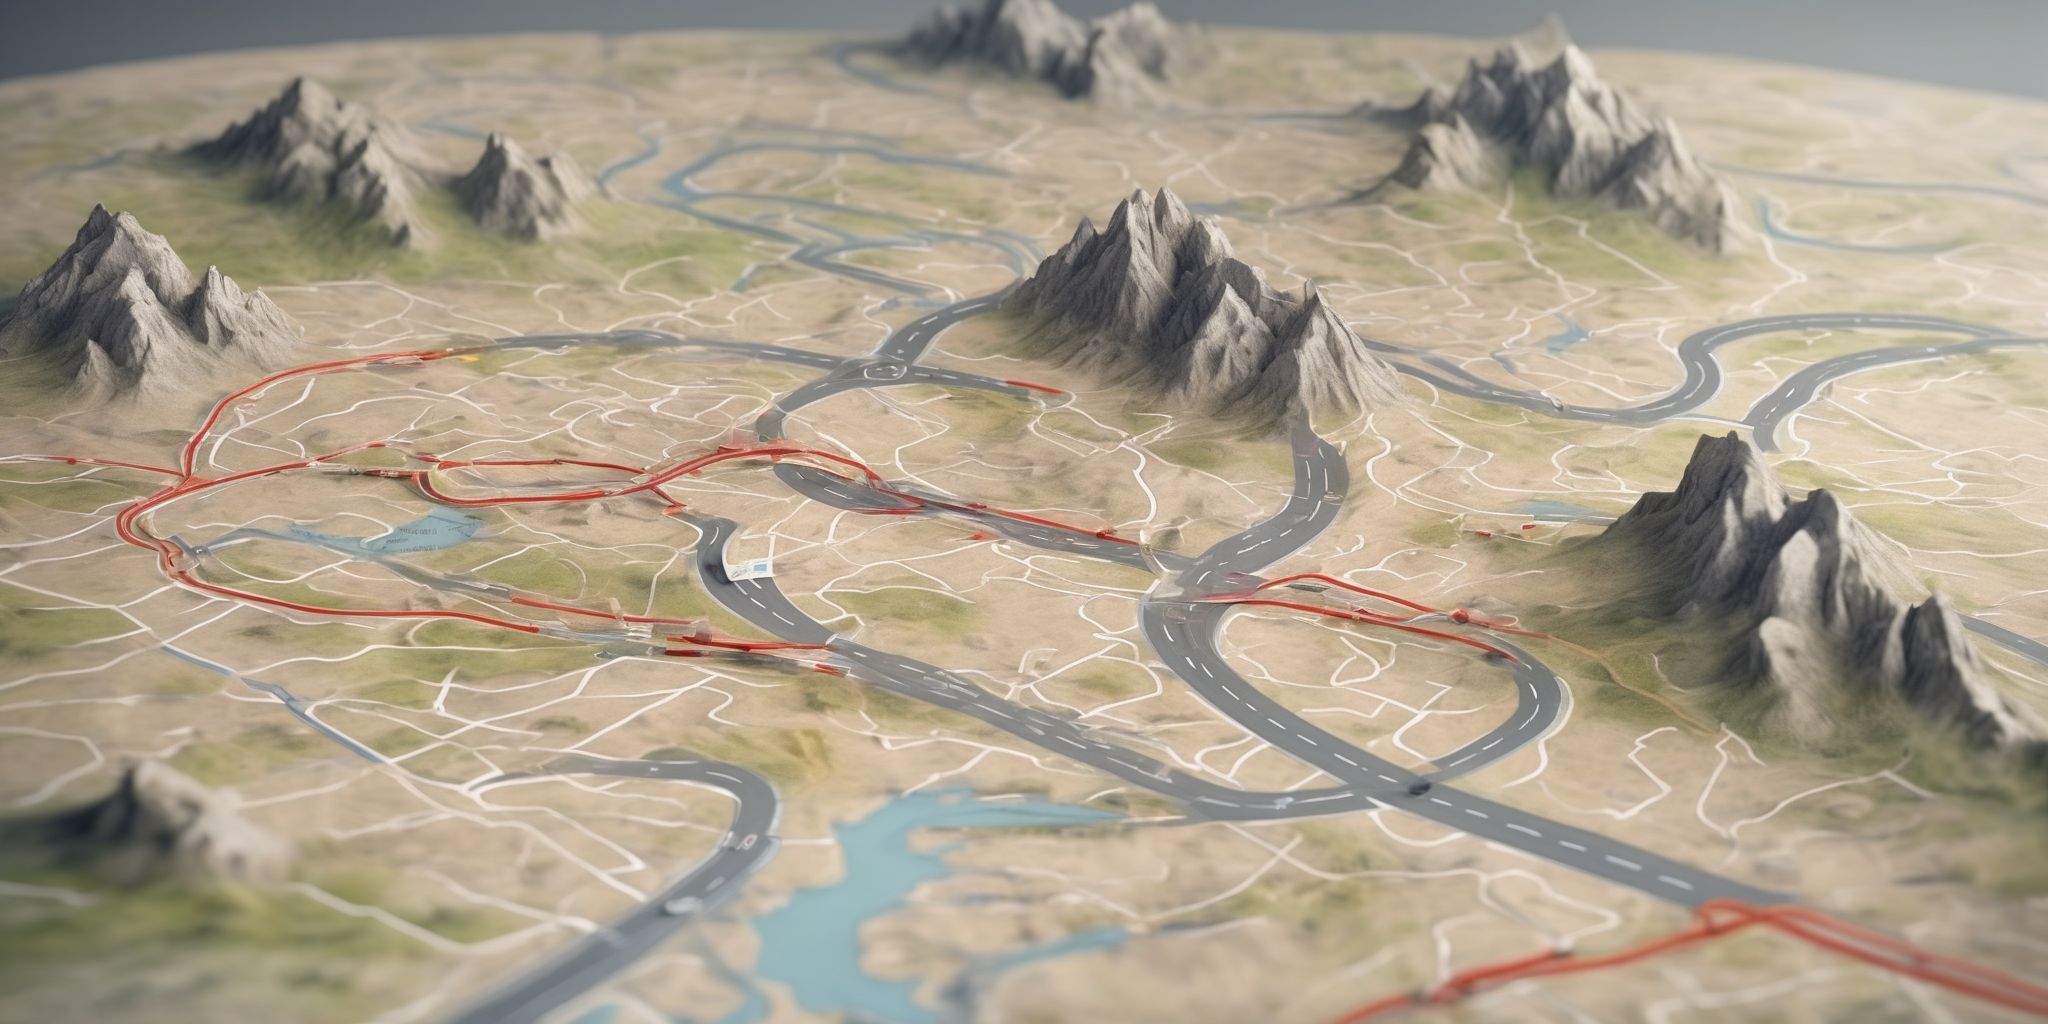 Roadmap  in realistic, photographic style